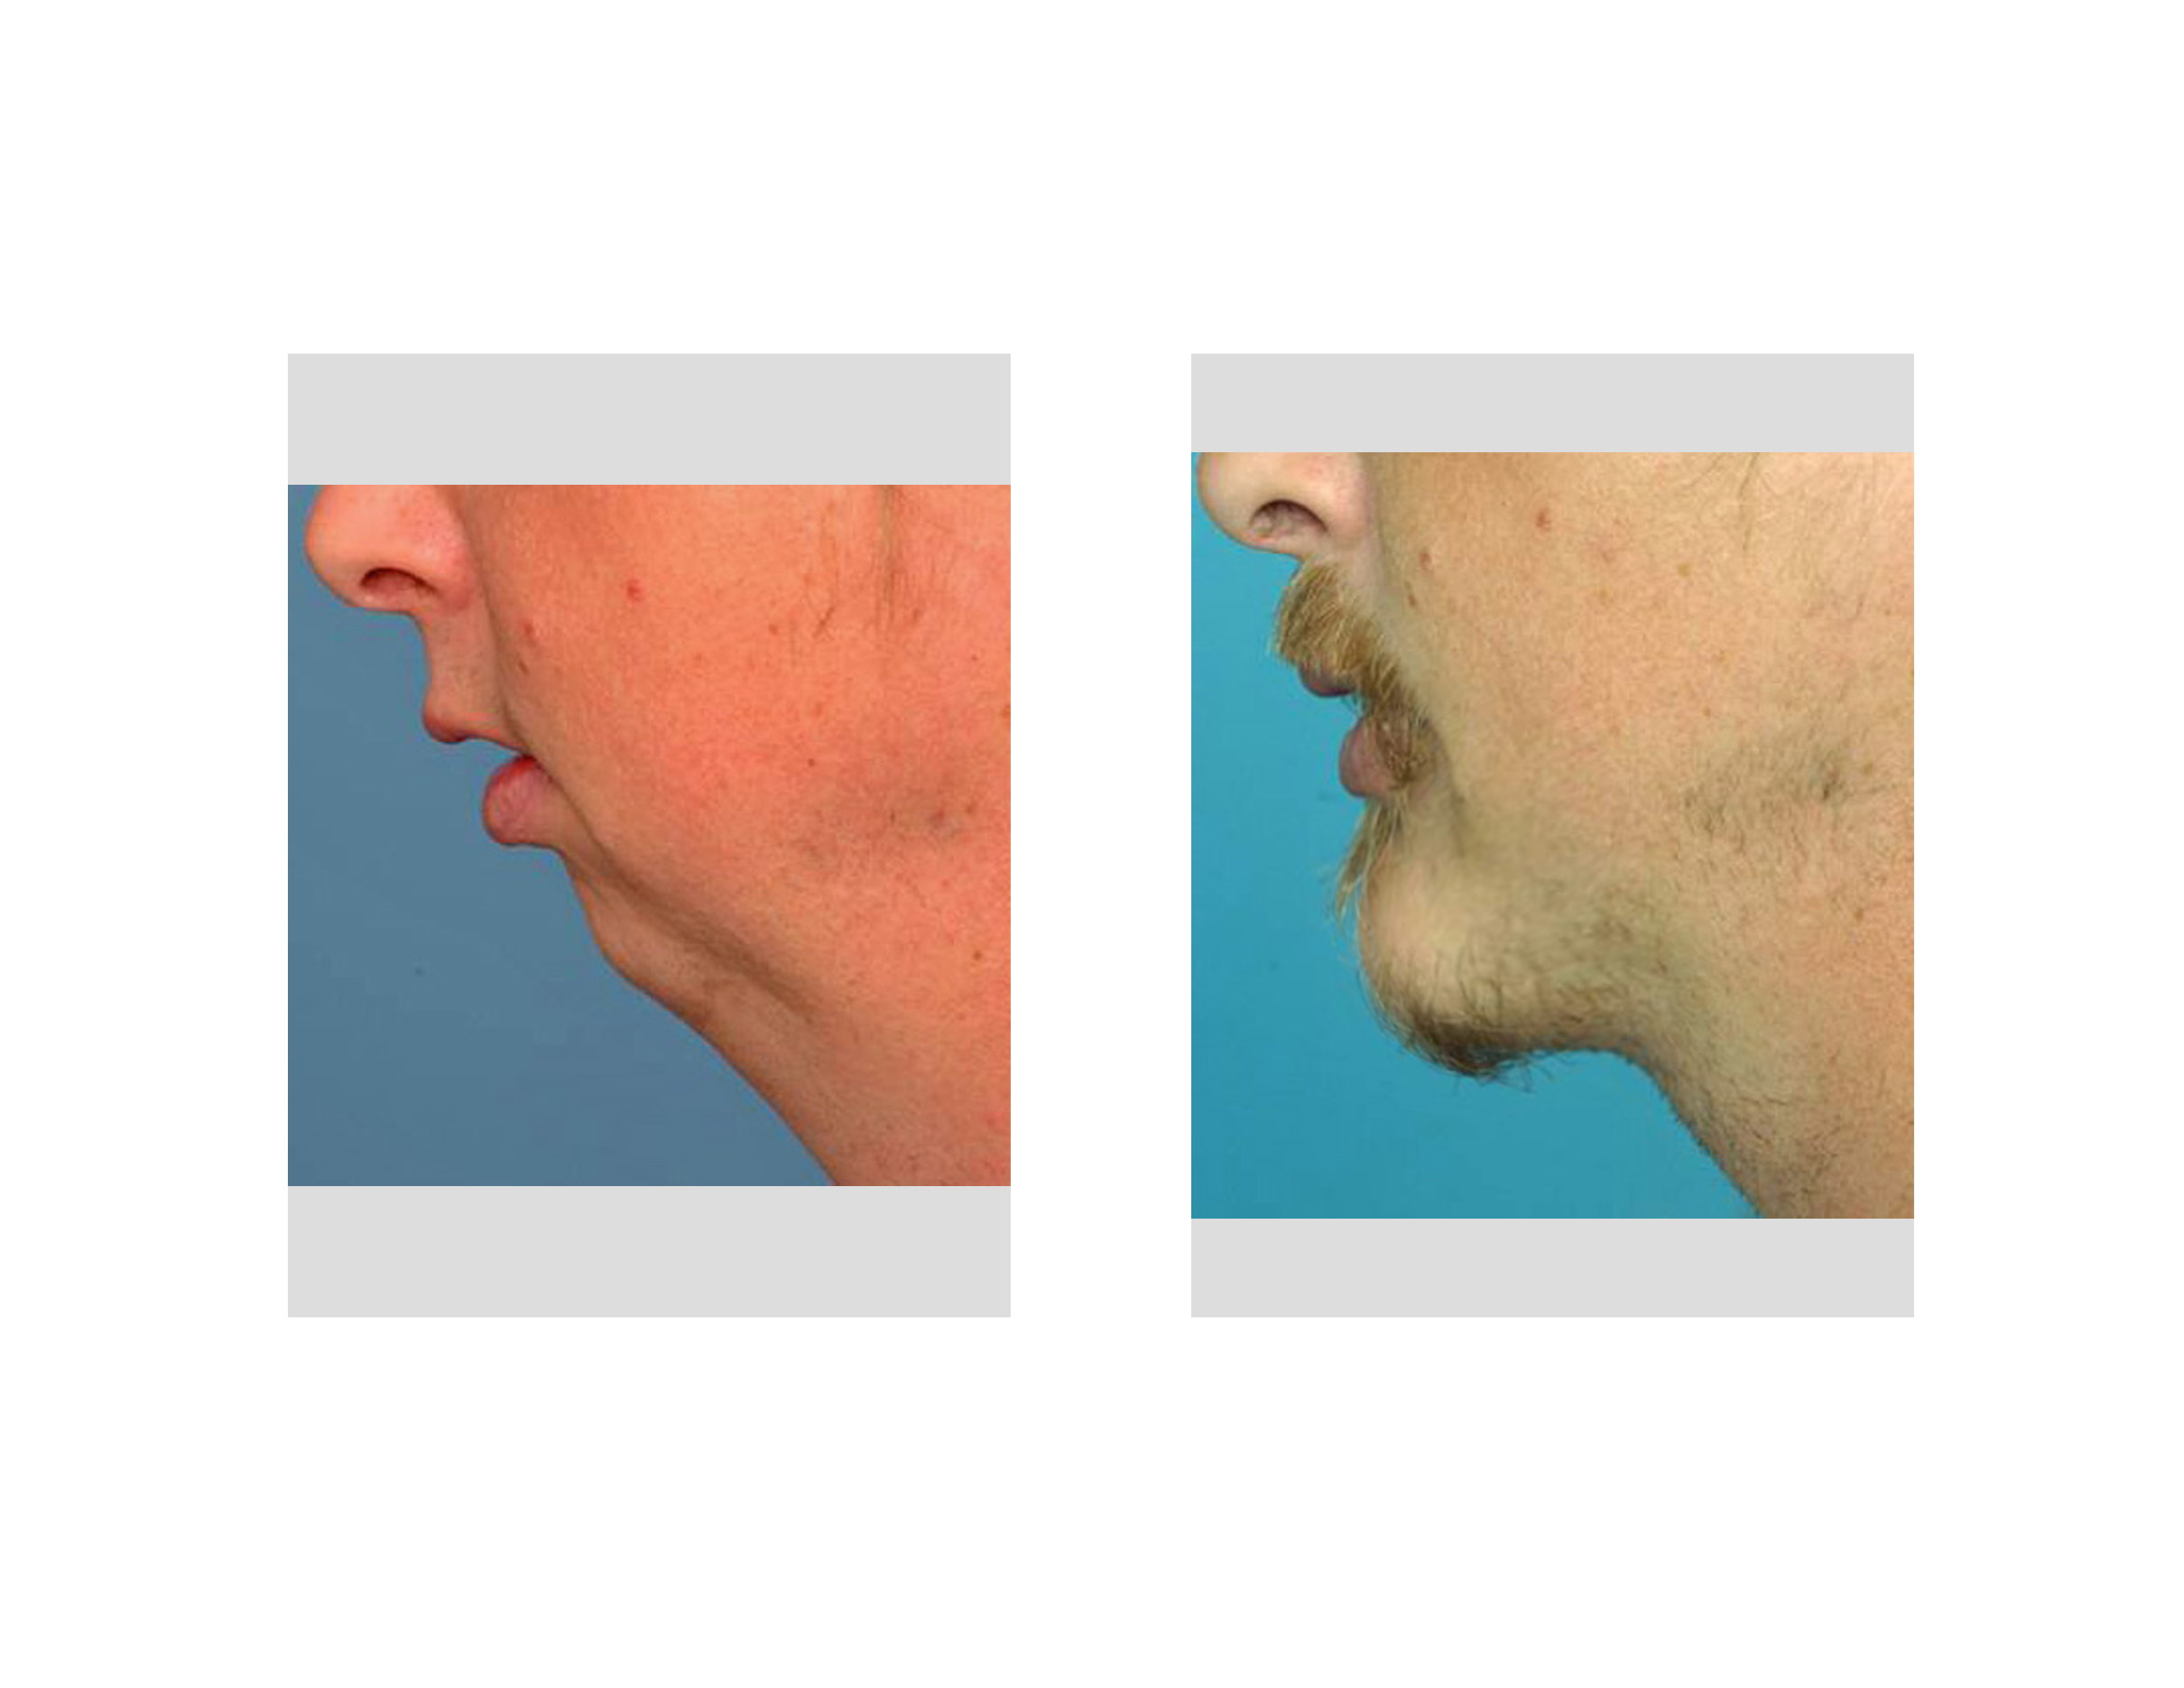 chin-augmentation-results-dr-barry-eppley-indianapolis.jpg